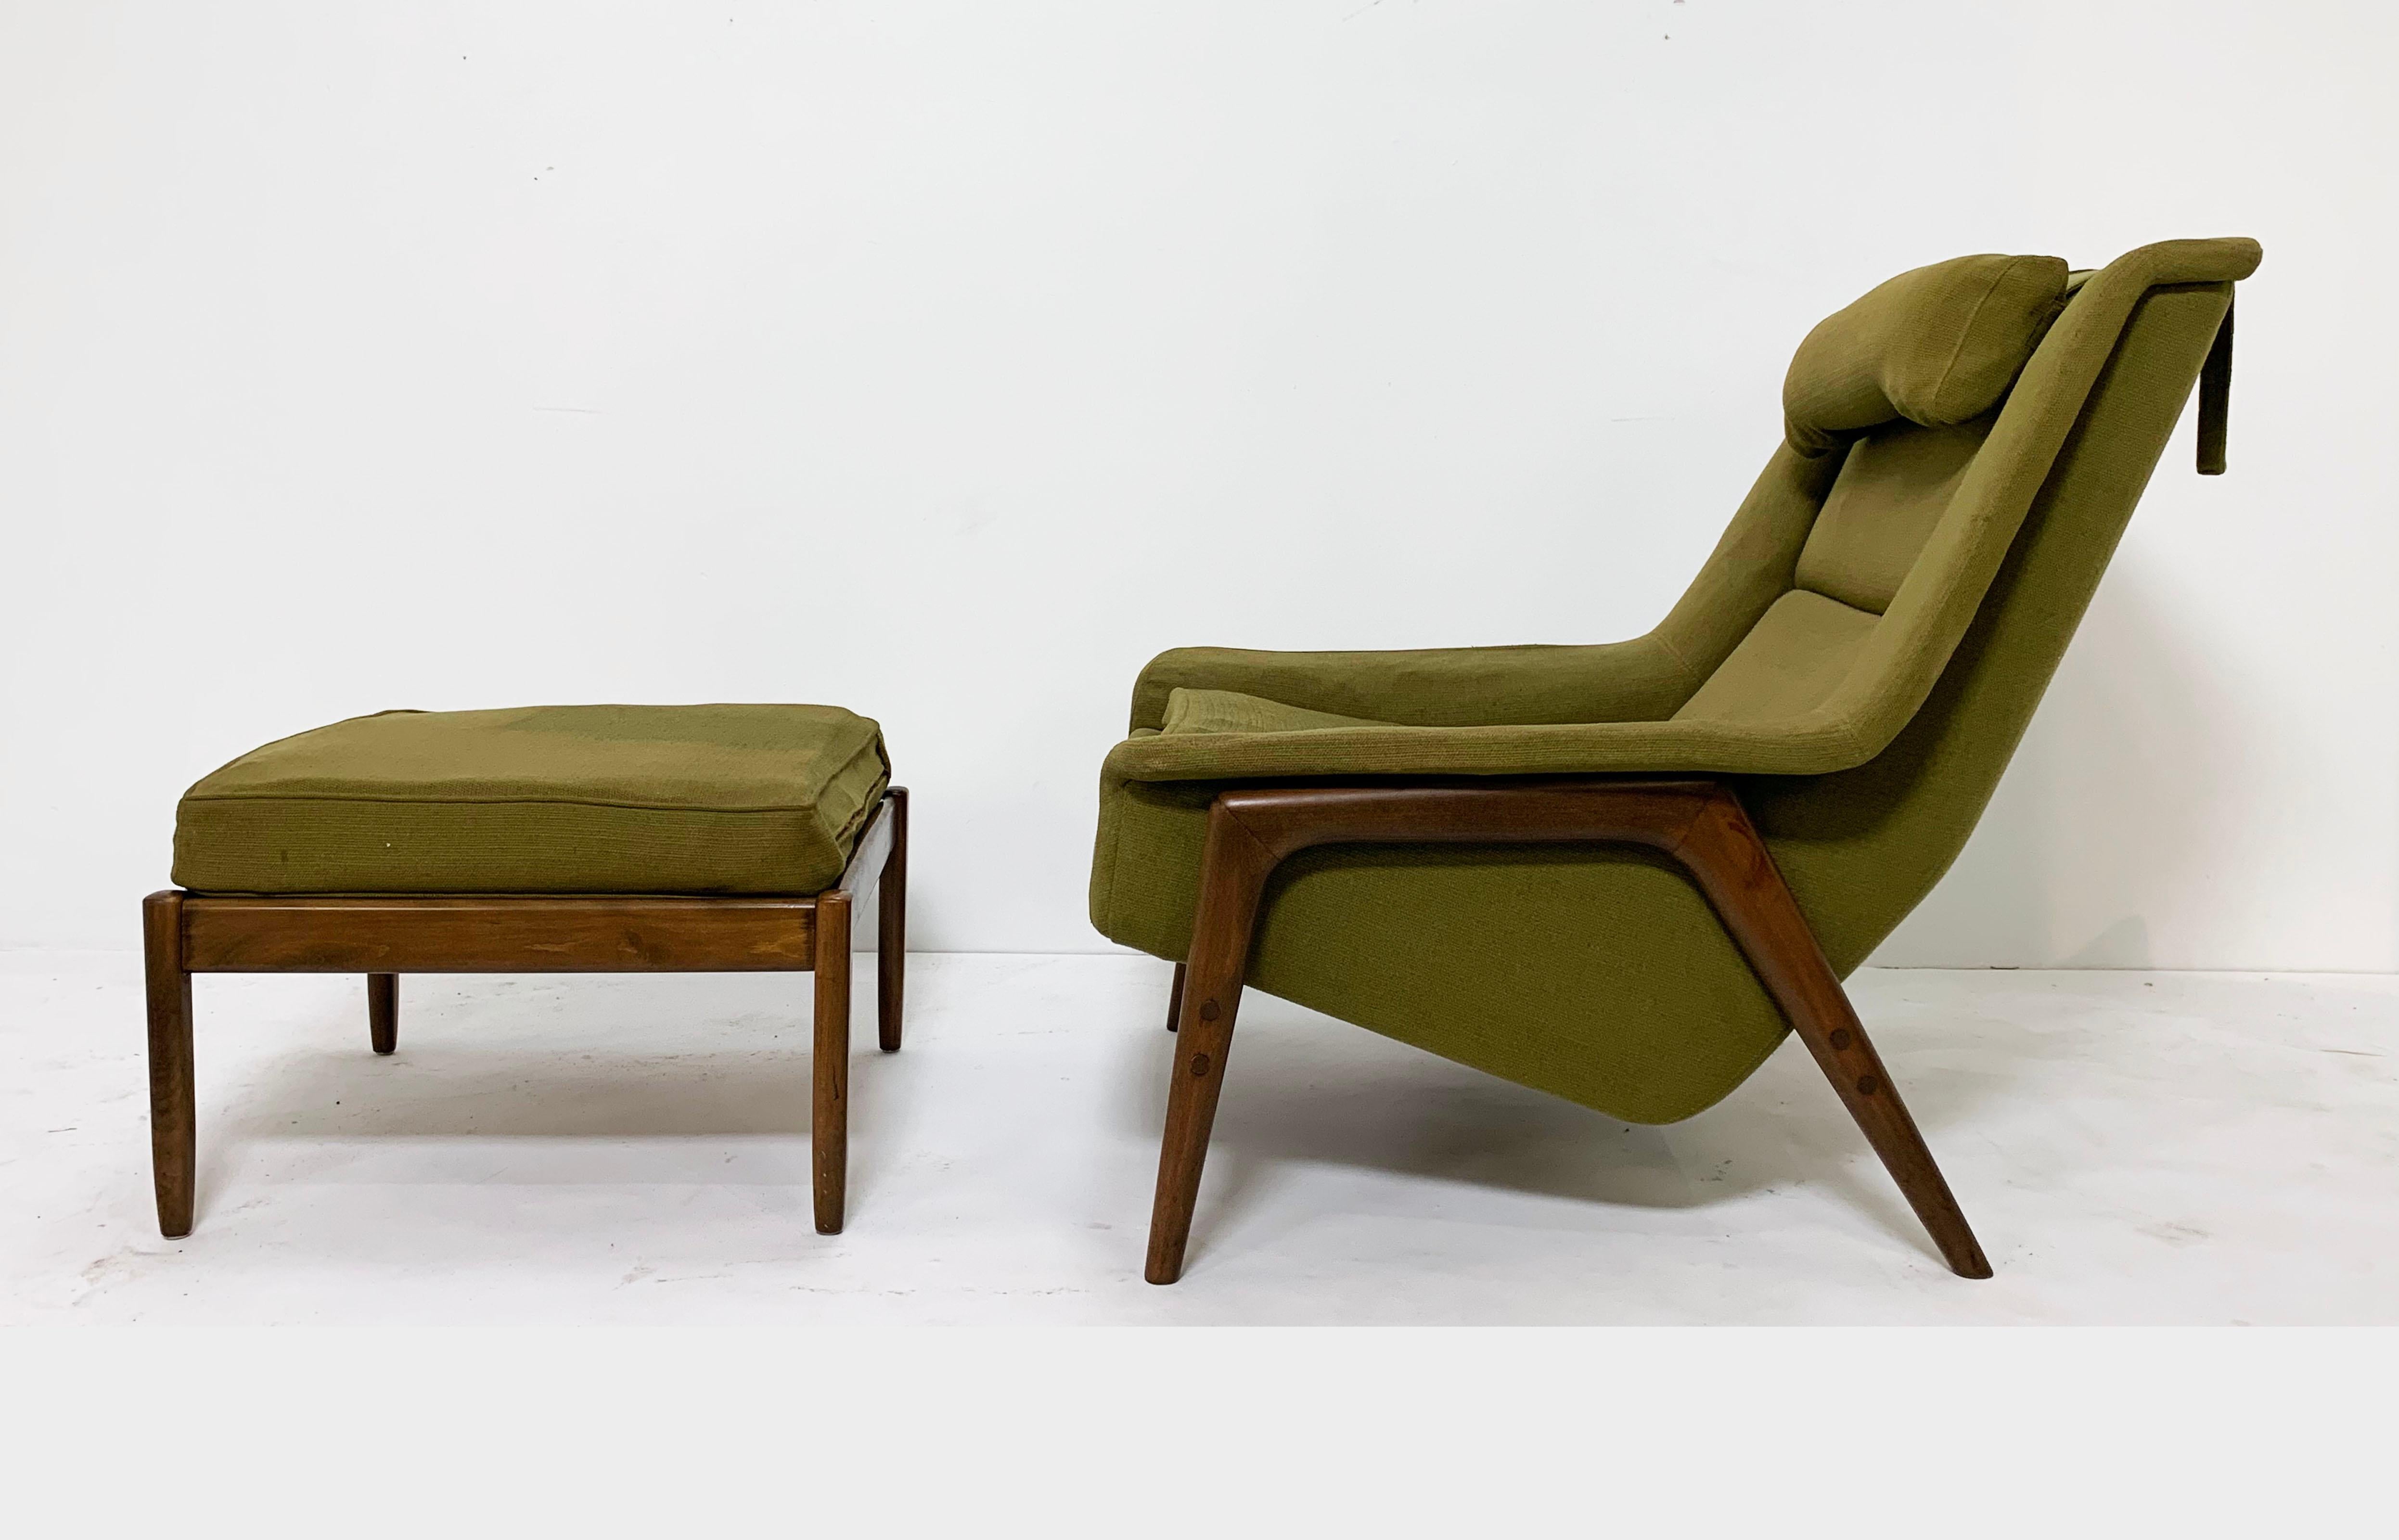 Handsome Danish modern lounge chair with sculptural birch frame legs and flared arms, and matching ottoman. 

Chair measures 33.5